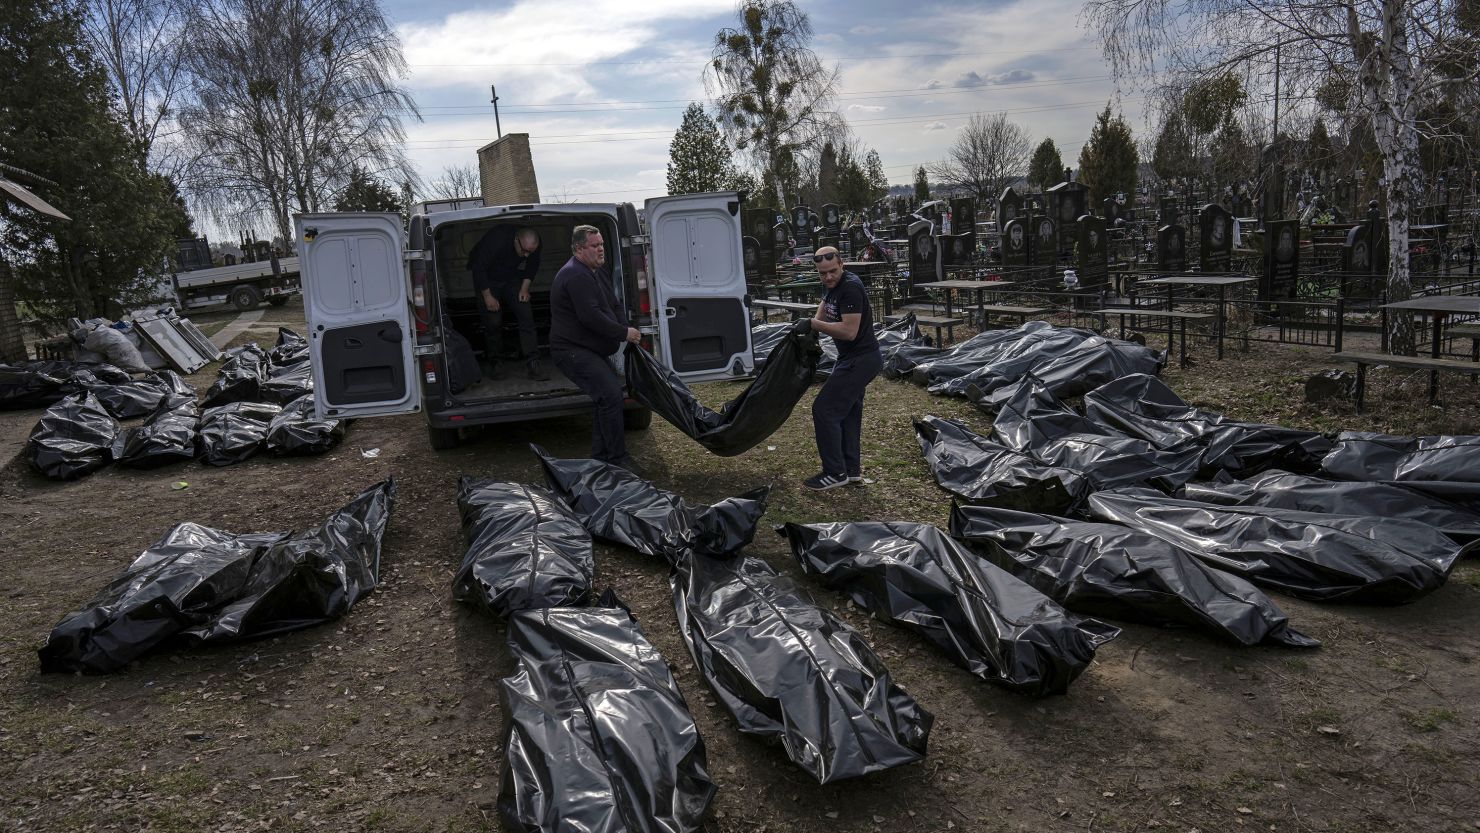 Cemetery workers unload bodies of killed civilians from a van in Bucha, Ukraine, on April 7, 2022.